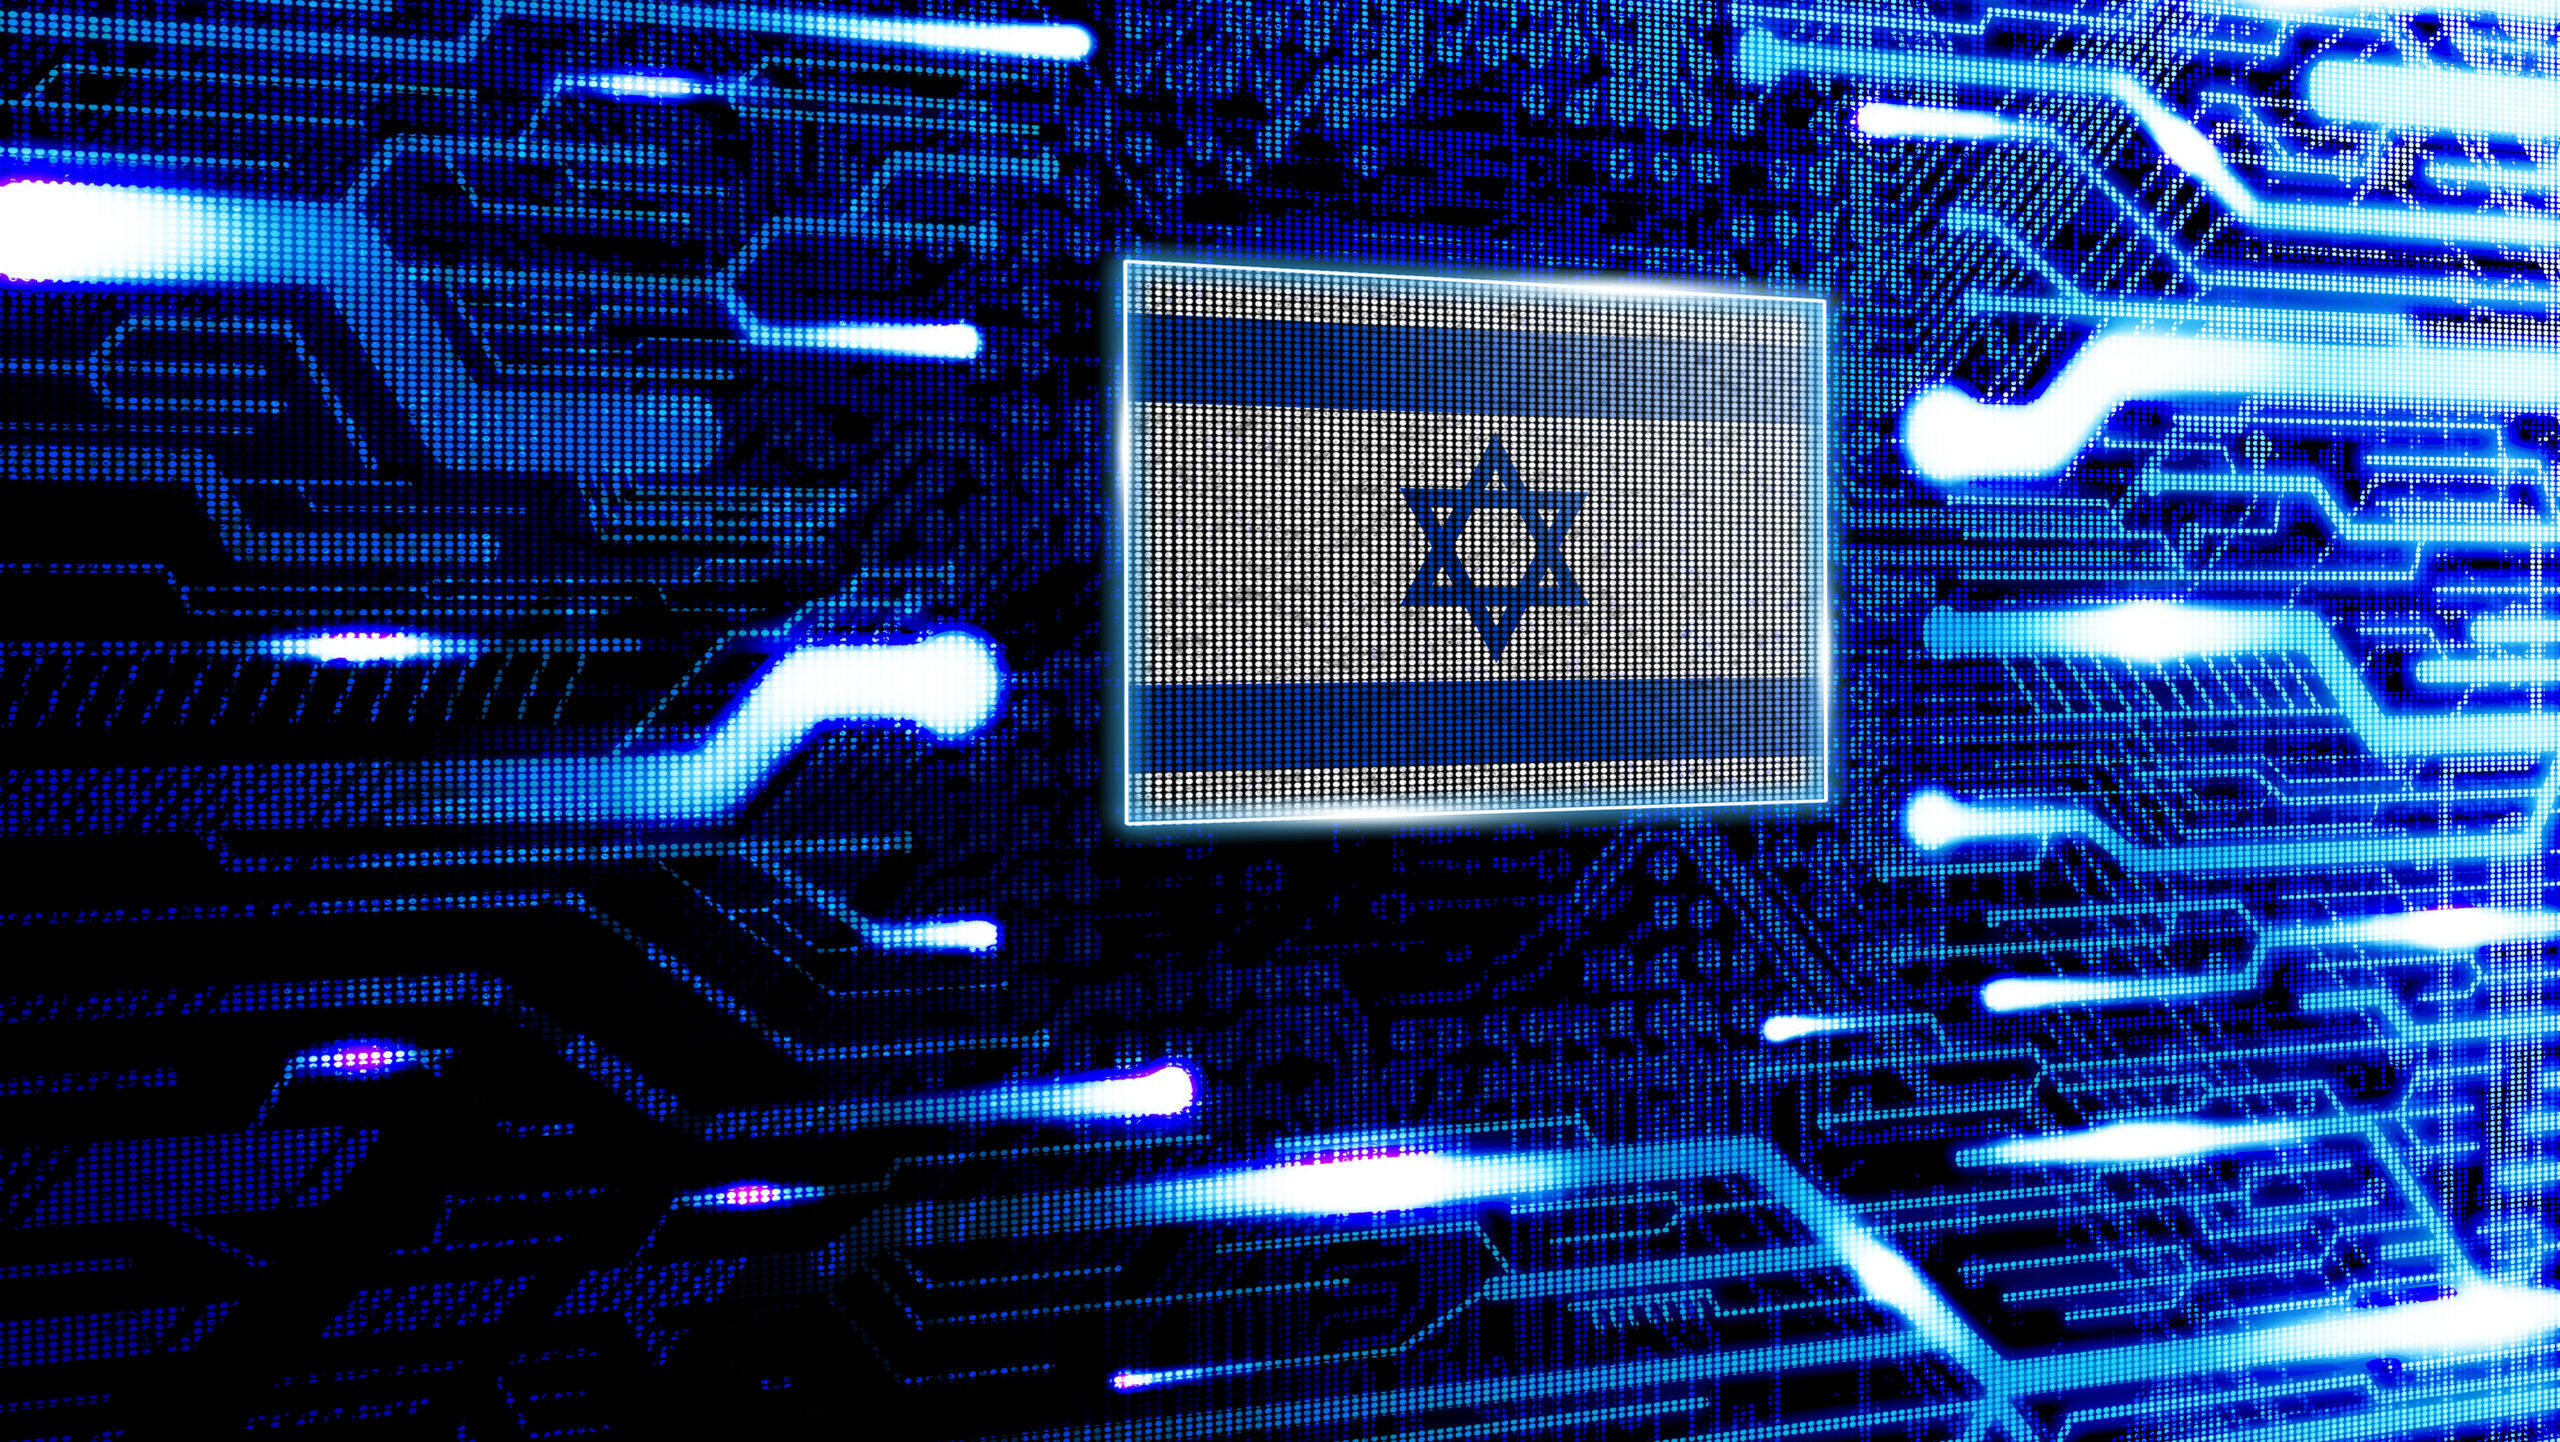 Cyber Sector Takes Center Stage: Israel Bolsters Defenses in Response to Surge of Attacks